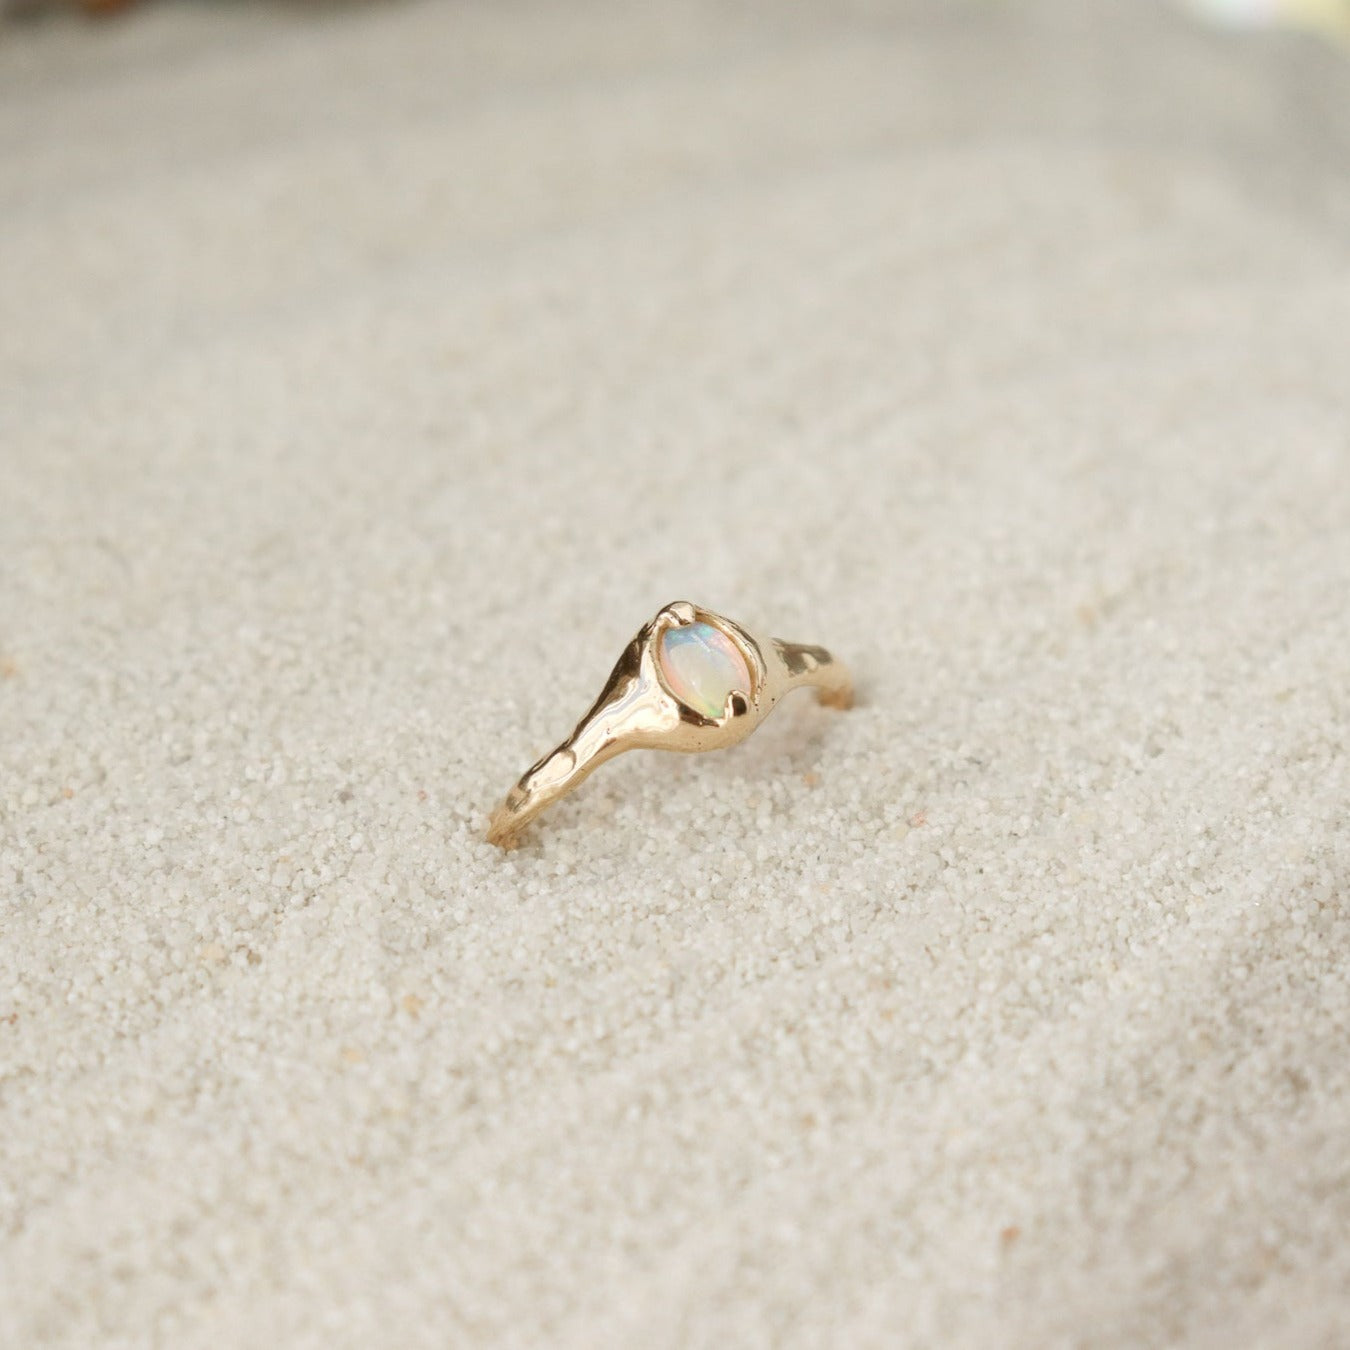 A small oval opal ring is set with prongs on an organically crafted 14k gold band.